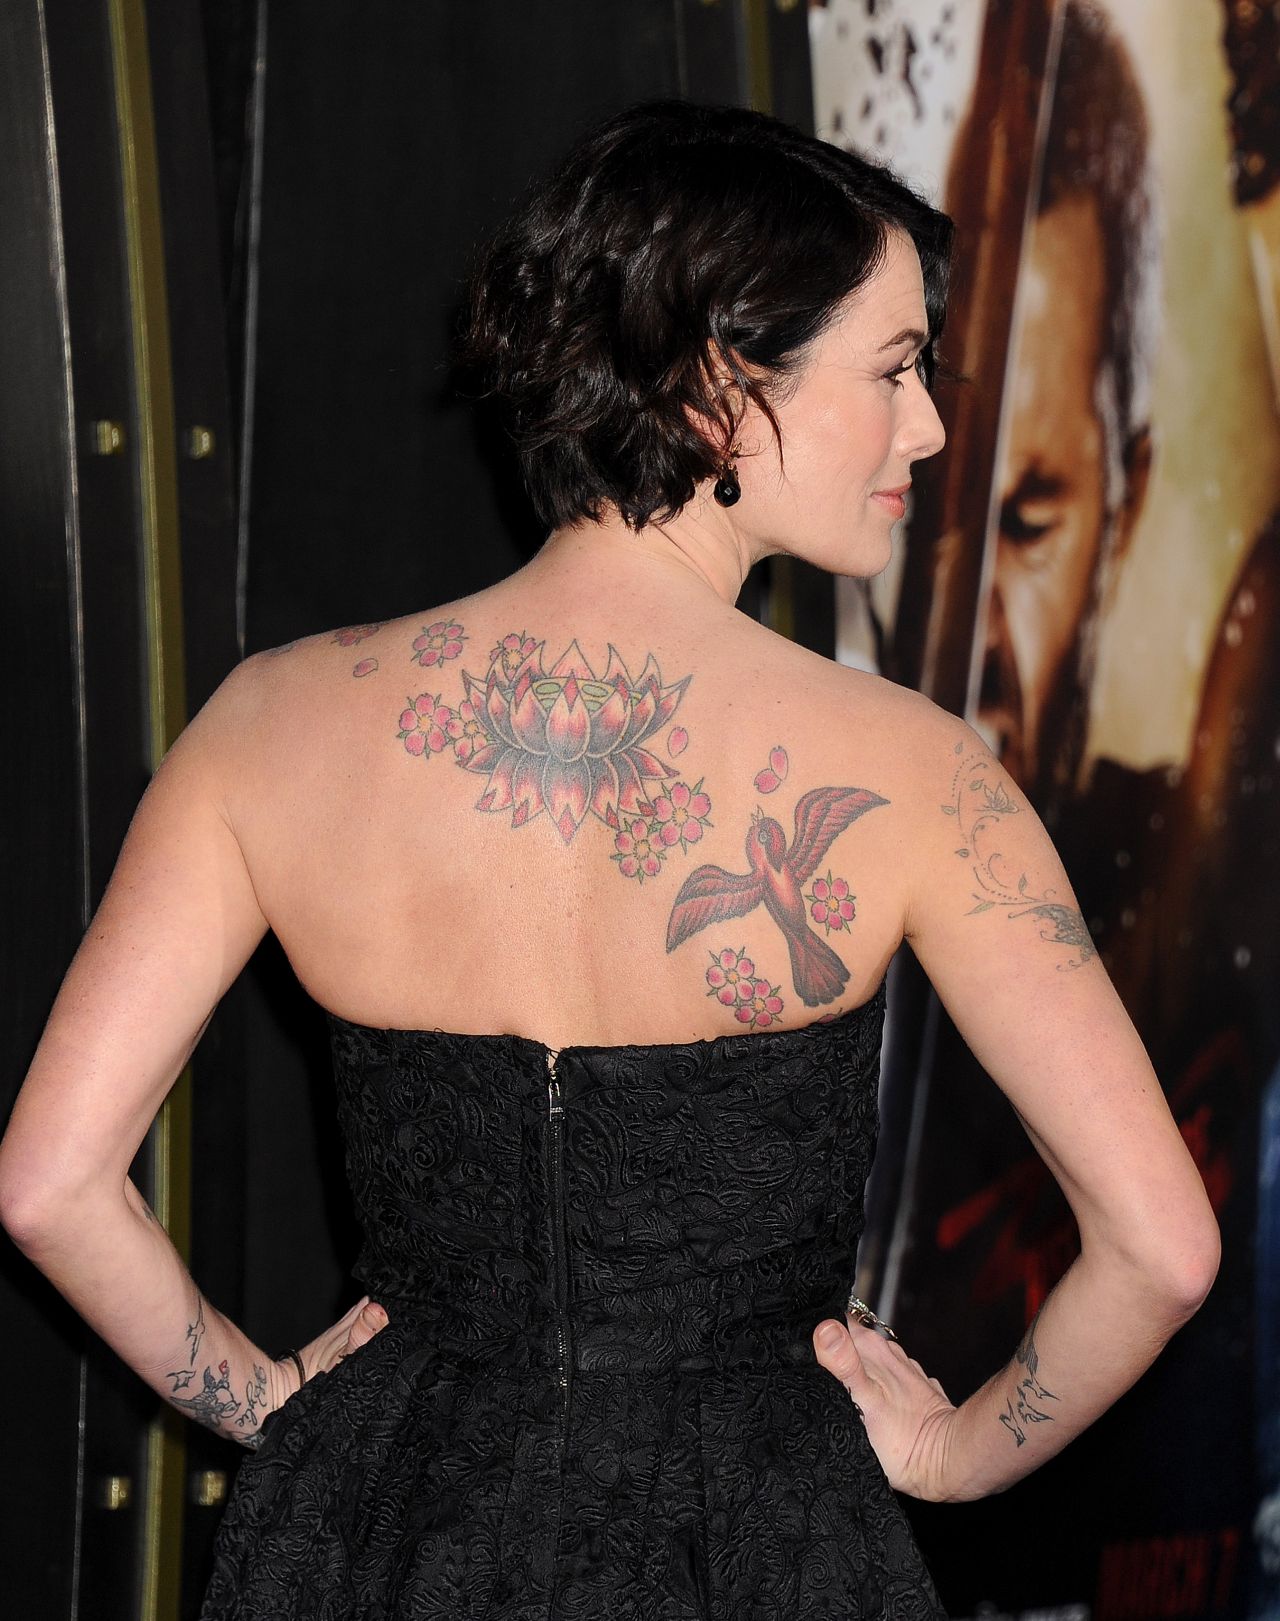 Lena Headey - '300 Rise of an Empire' Premiere in Los Angeles1280 x 1621